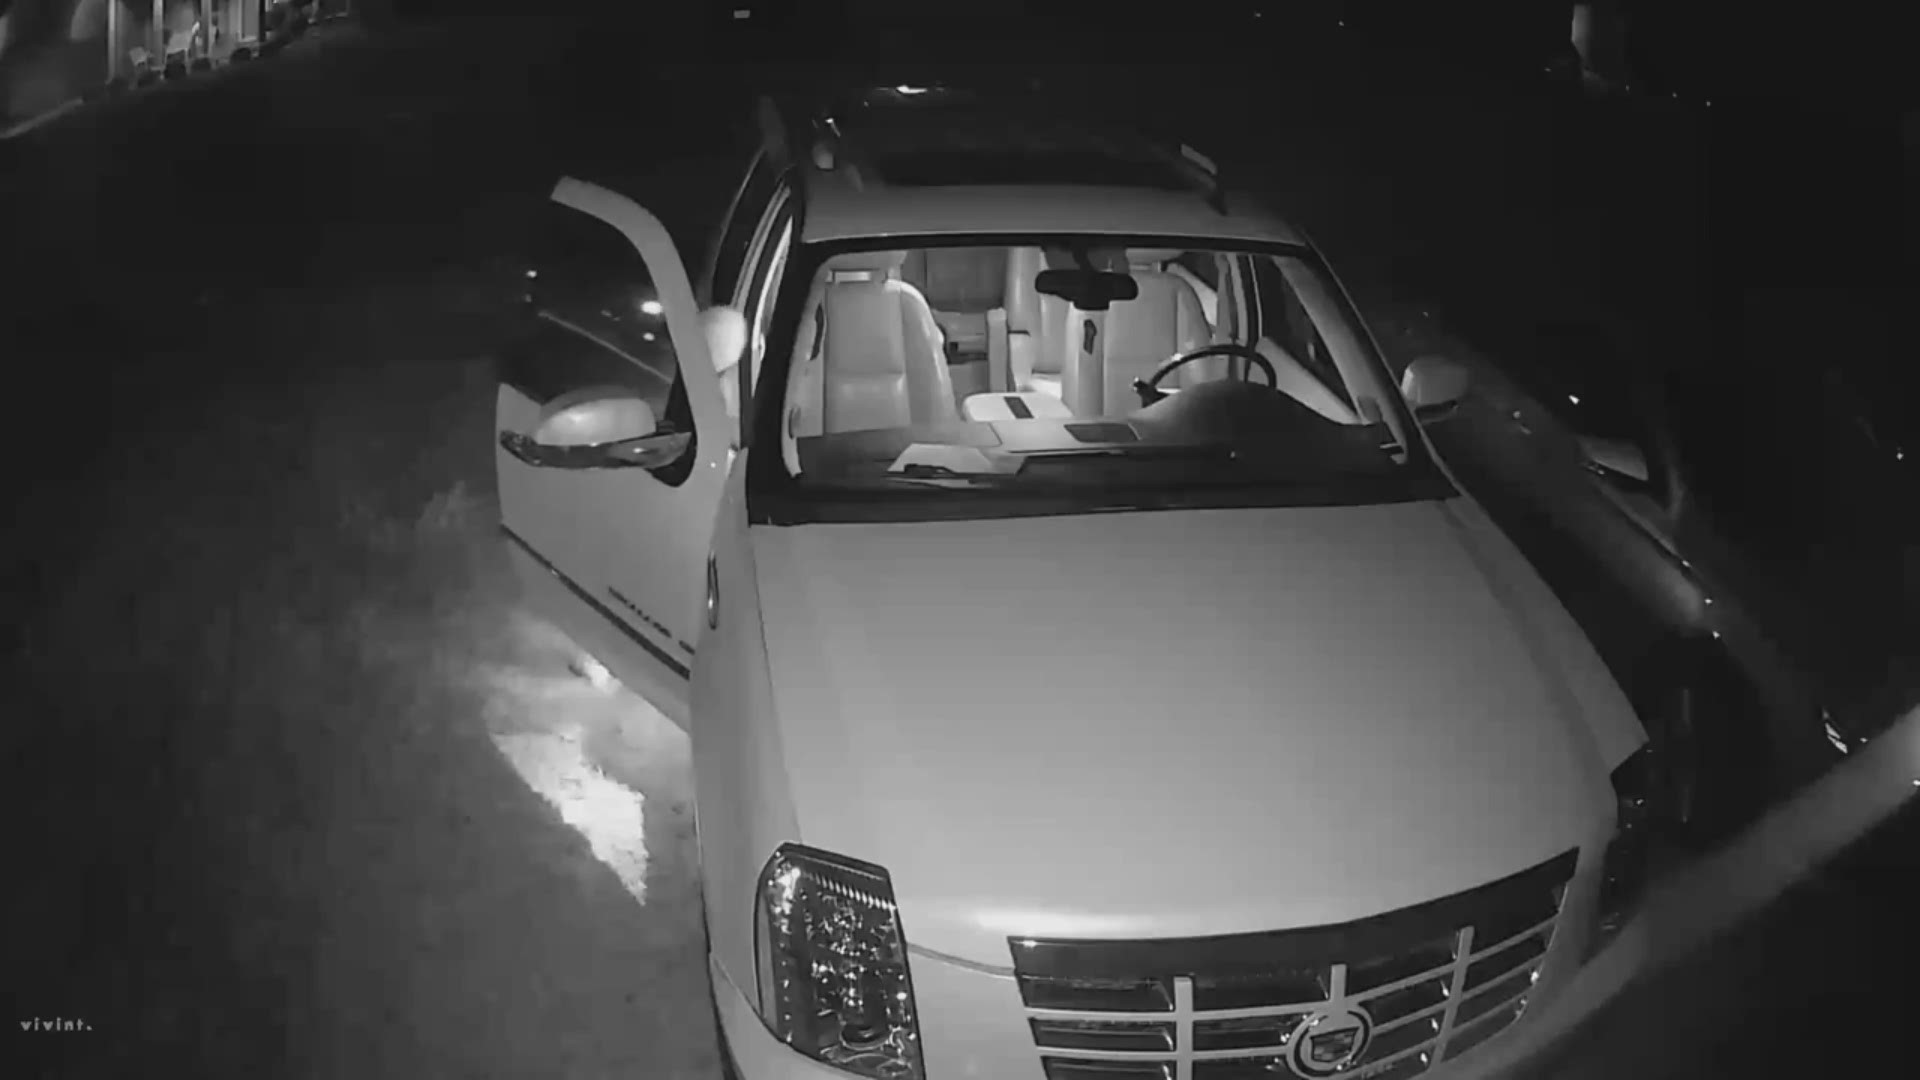 Surveillance video from a Killeen neighborhood shows two cars thieves in the act.